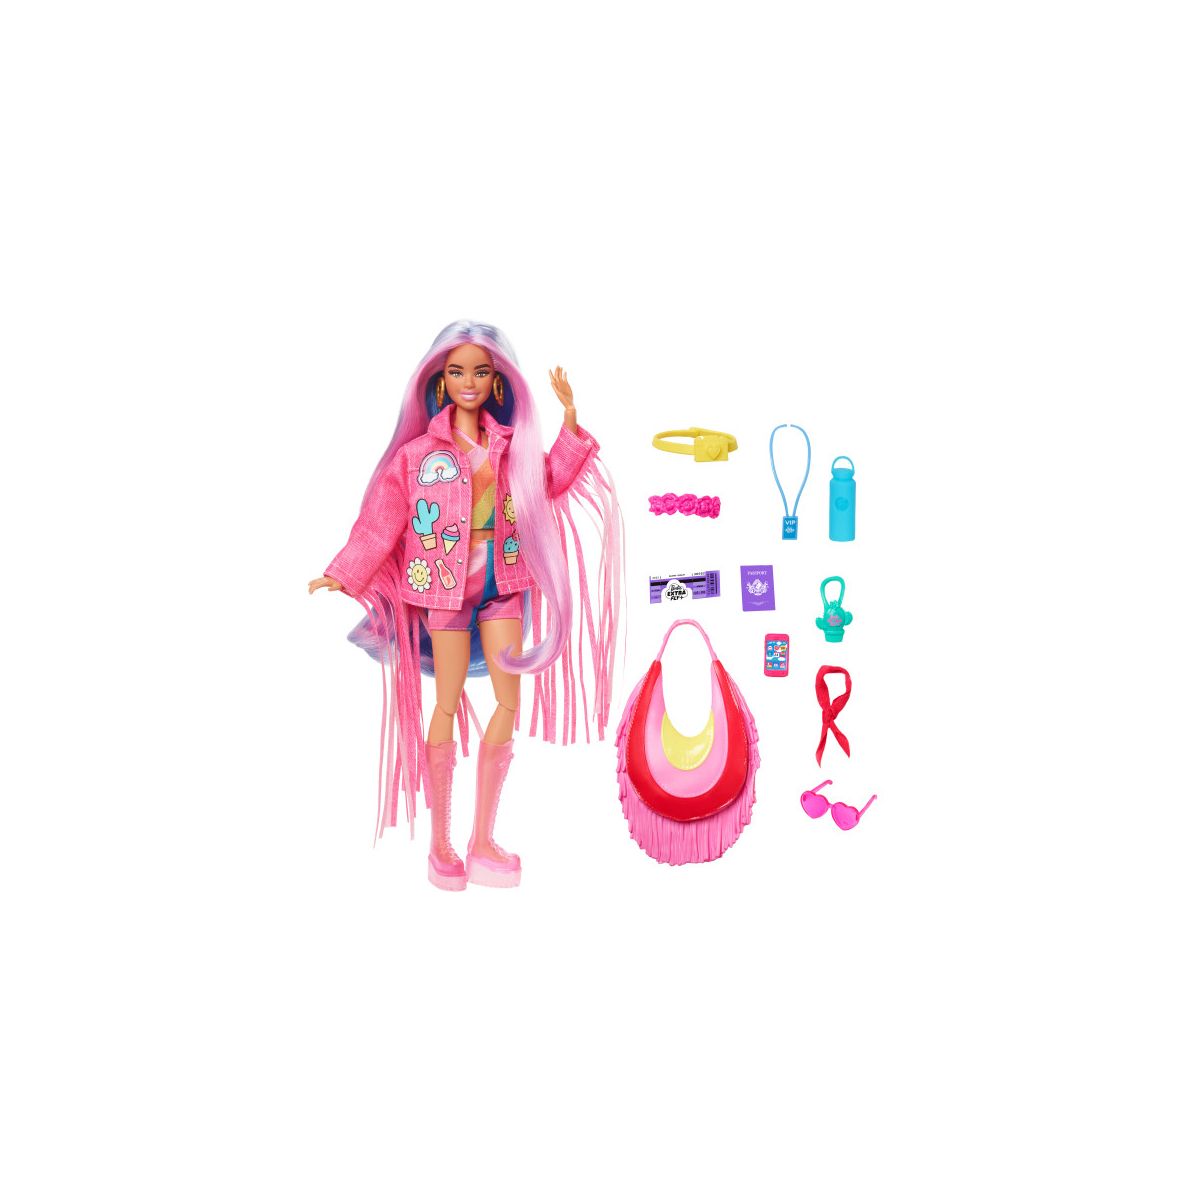 Lalka Extra Fly Hippie [mm:] 290 Barbie (HPB15)